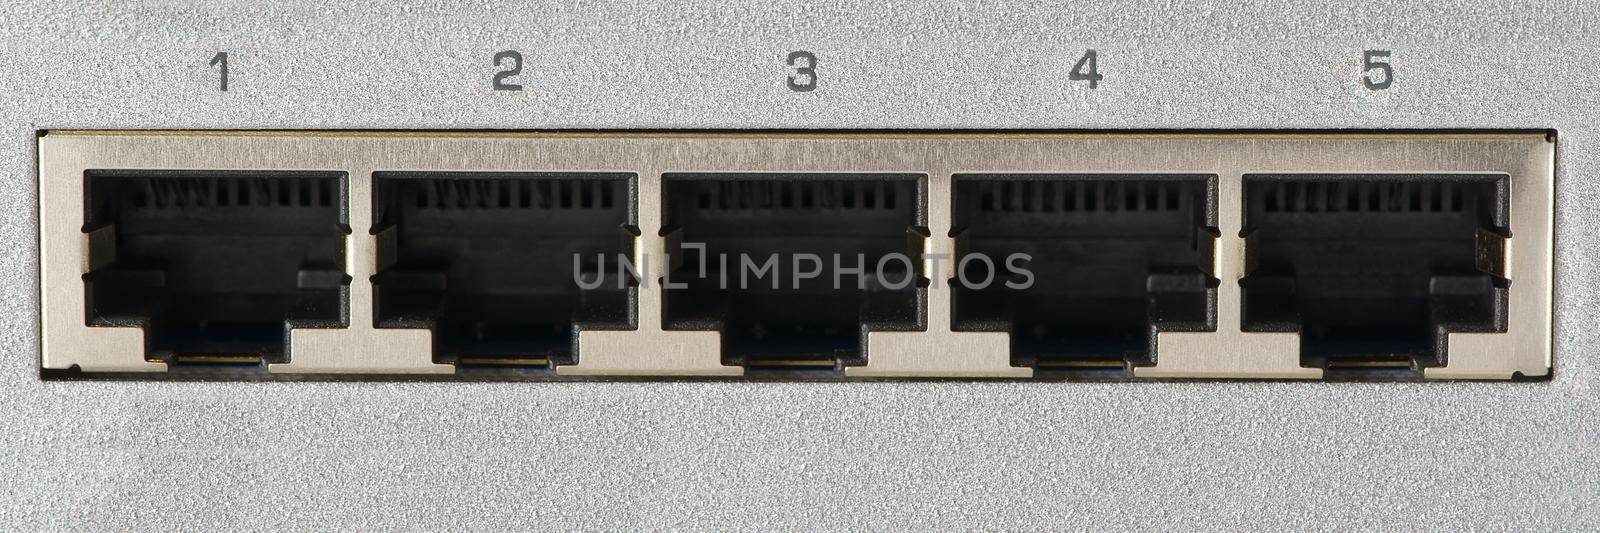 Small router and switch. tcp ip network business concept. High - performance gigabit switch. by PhotoTime